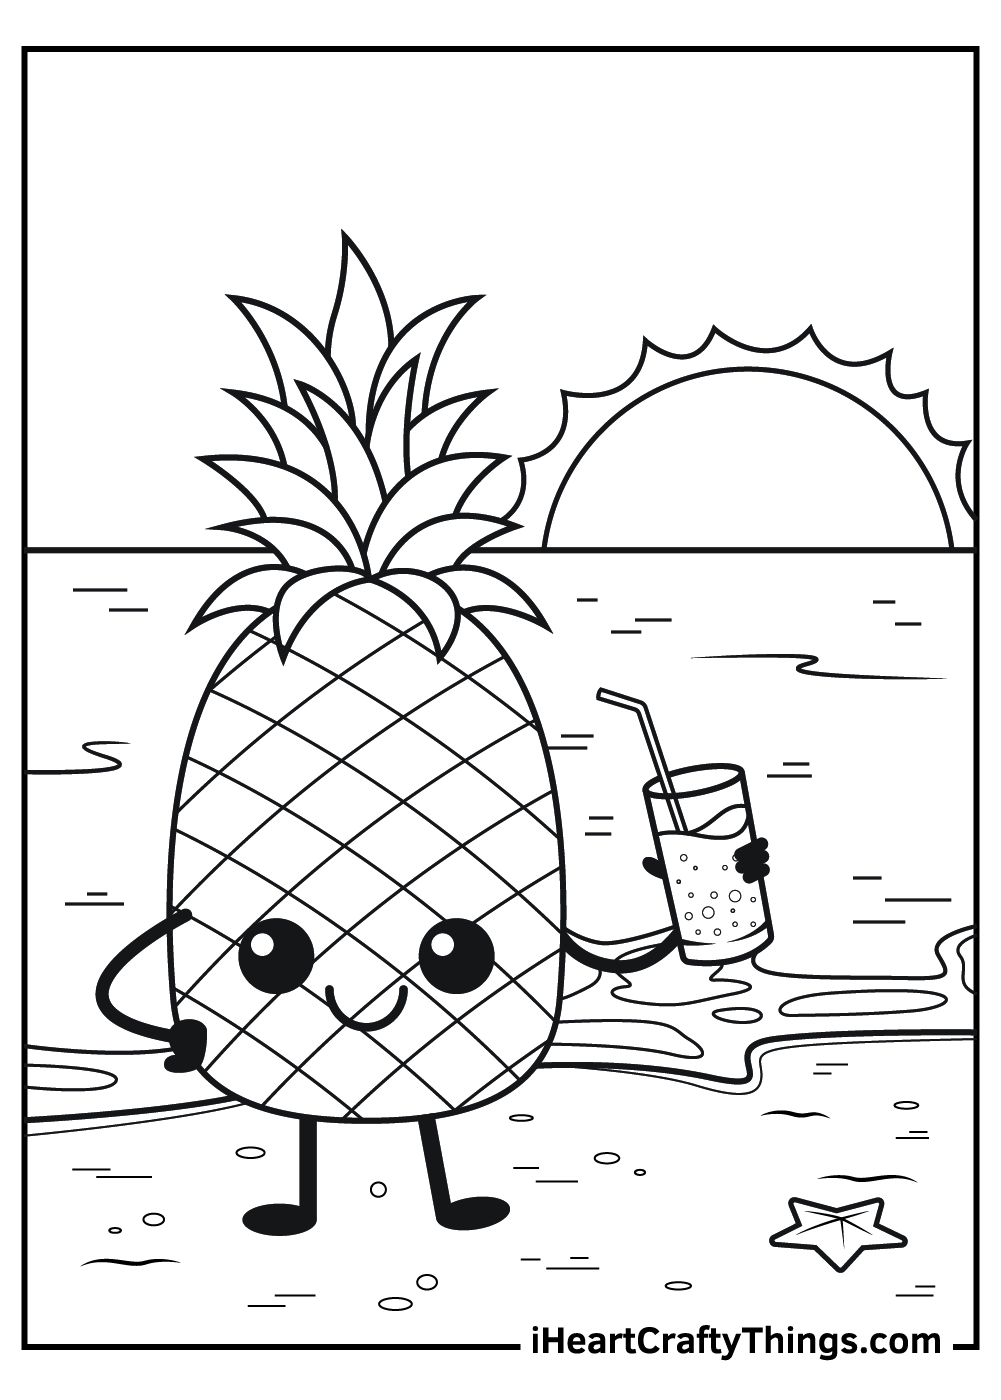 Pineapple coloring pages free printables